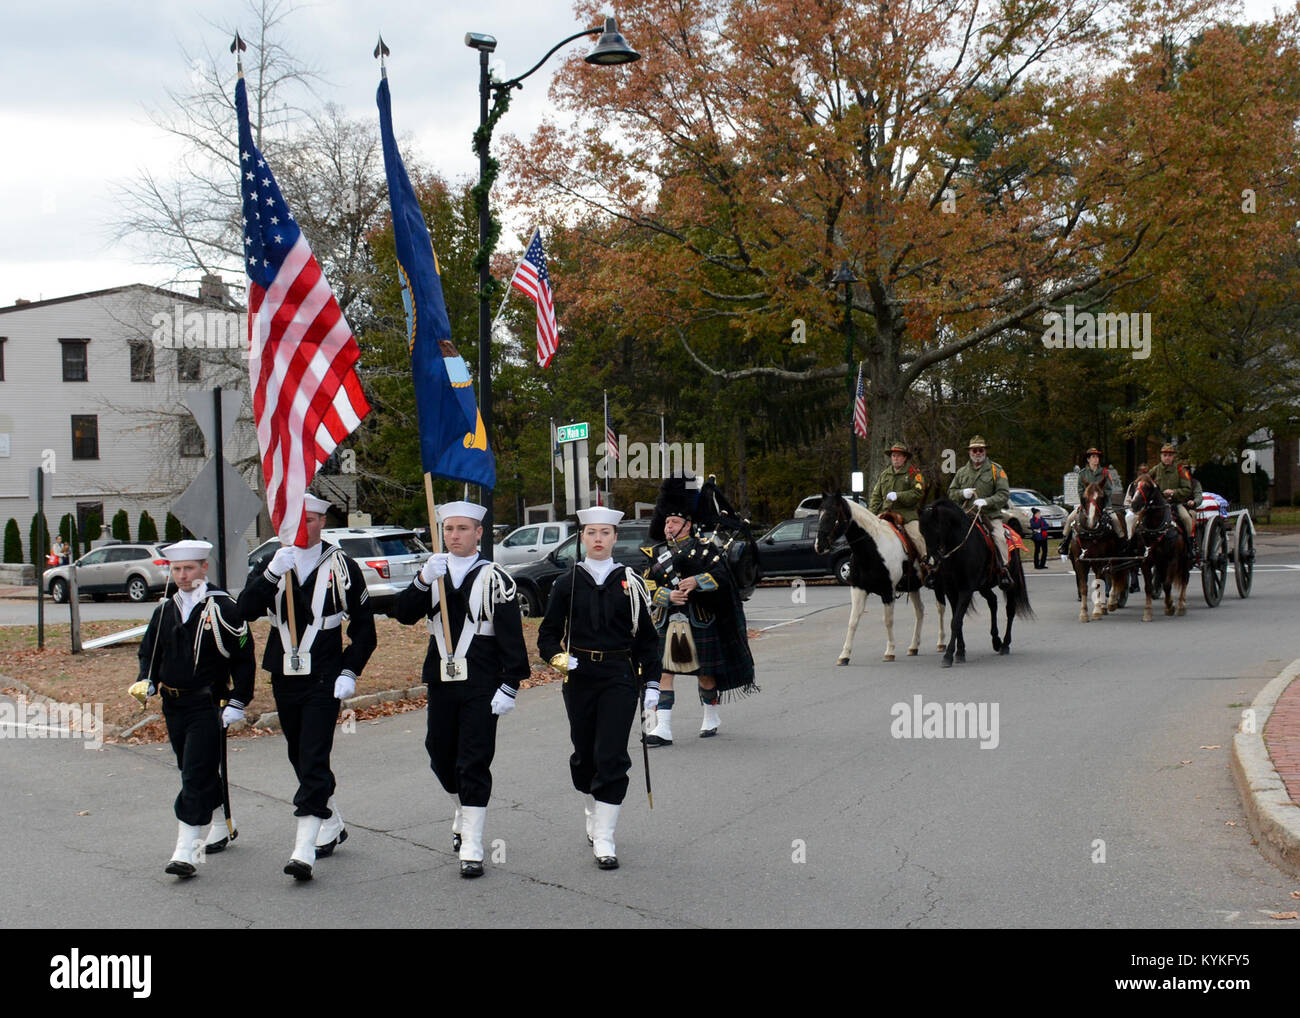 CONCORD, Mass. (Nov. 15, 2017) A USS Constitution color guard leads the funeral procession of Medal of Honor recipient Capt. Thomas J. Hudner, Jr. Hudner was a naval aviator and received the Medal of Honor for his actions during the Battle of the Chosin Reservoir during the Korean War. (U.S. Navy photo by Mass Communication Specialist 3rd Class Casey Scoular/Released)171115-N-SM577-0100 Stock Photo